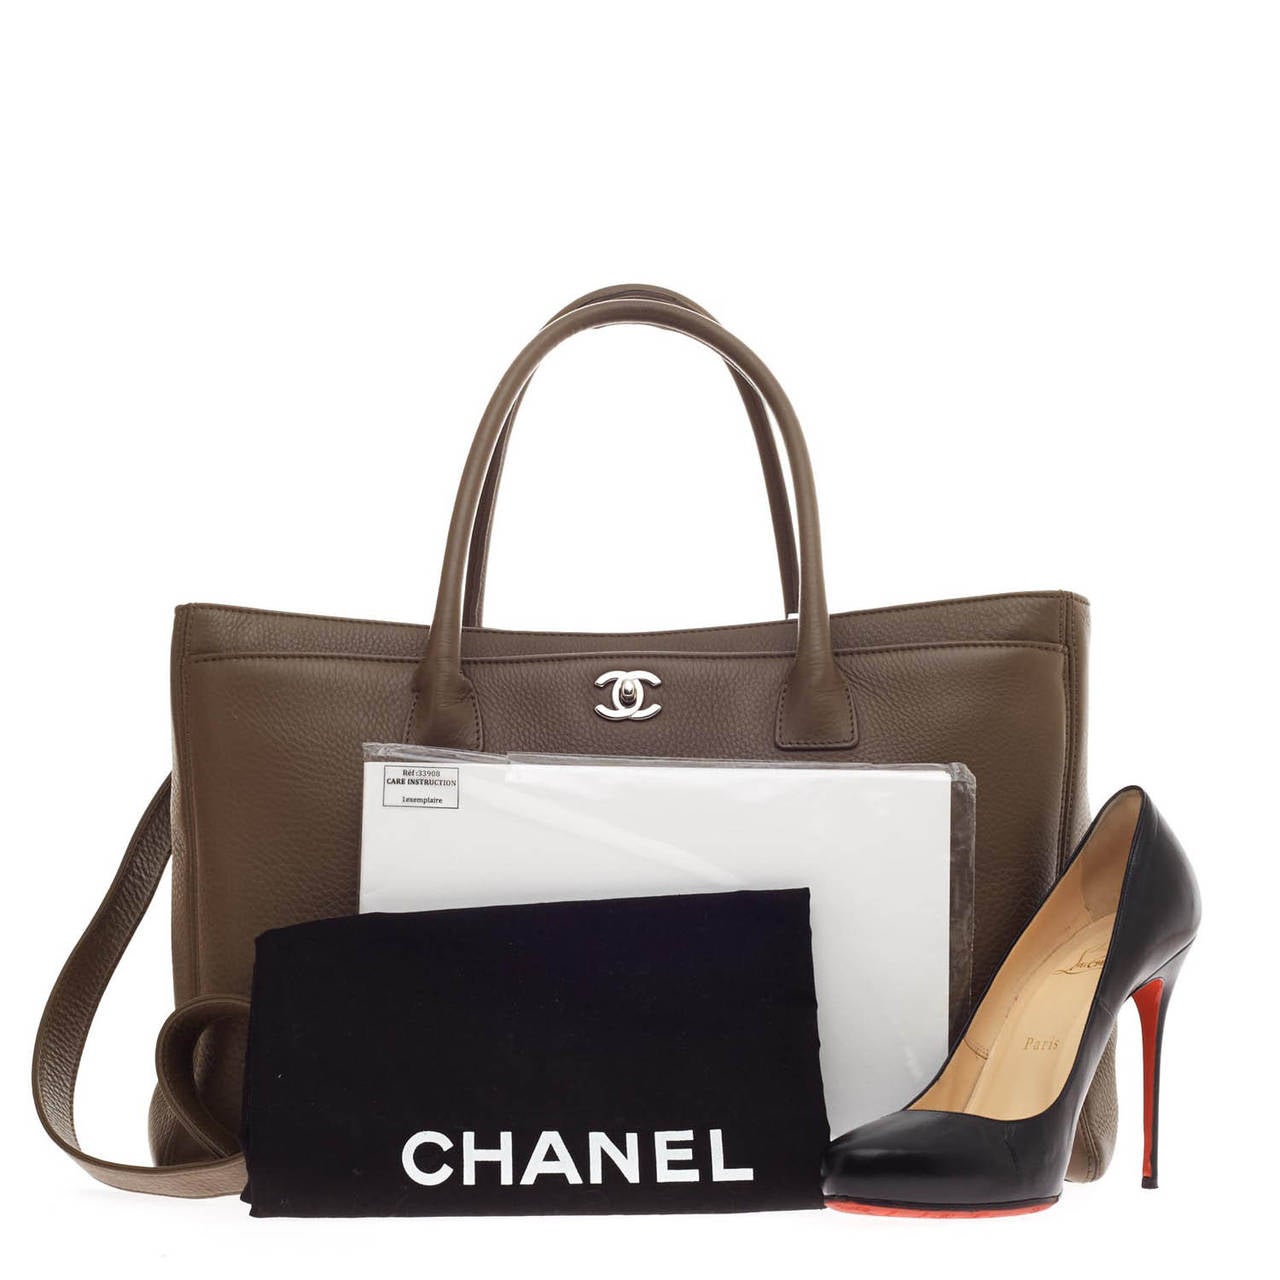 This authentic Chanel Cerf Executive Tote in beautiful dark taupe pebbled leather is ideal for the modern woman as it can be dressed up or down. Its classic boxy silhouette, roomy lined grey interior and removable shoulder strap enables it to go